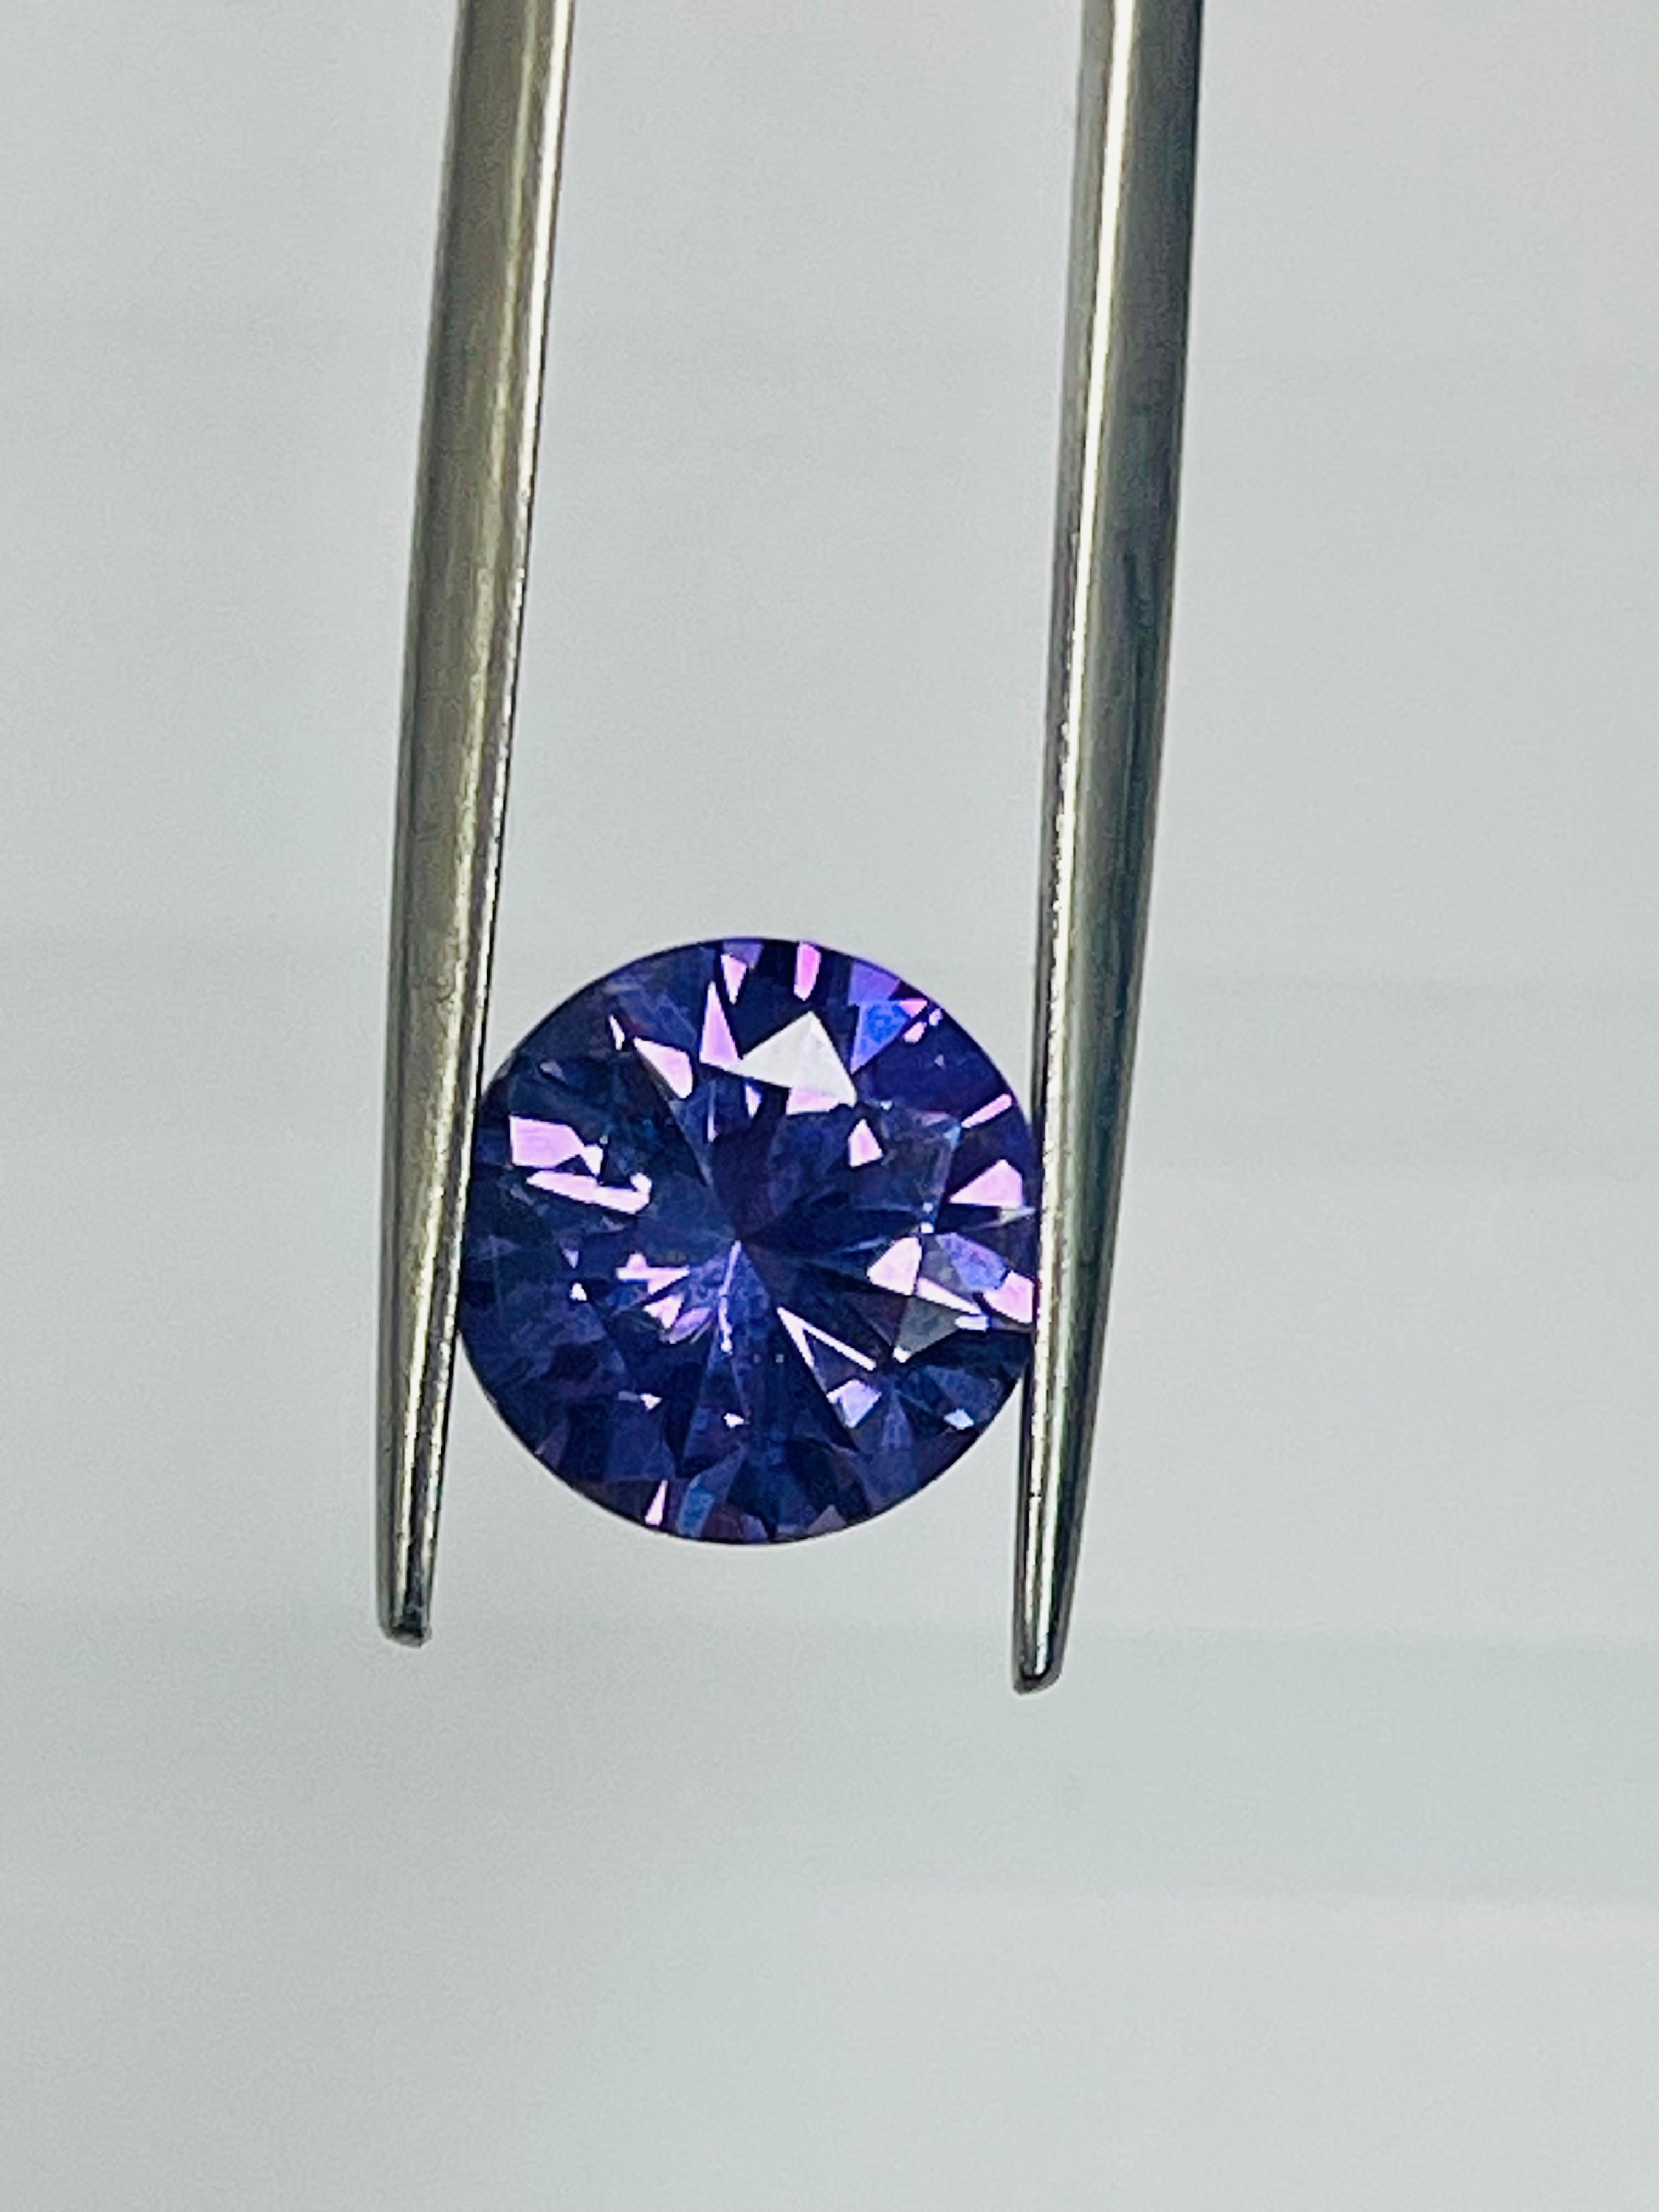 This 3.06 Ct  purple sapphire is one of of the most beautiful variety of colors in sapphires and it is Natural No Heat and it is also very beautifully cut round Diamond cut shape which makes it very unique gem and amazing color and quality.